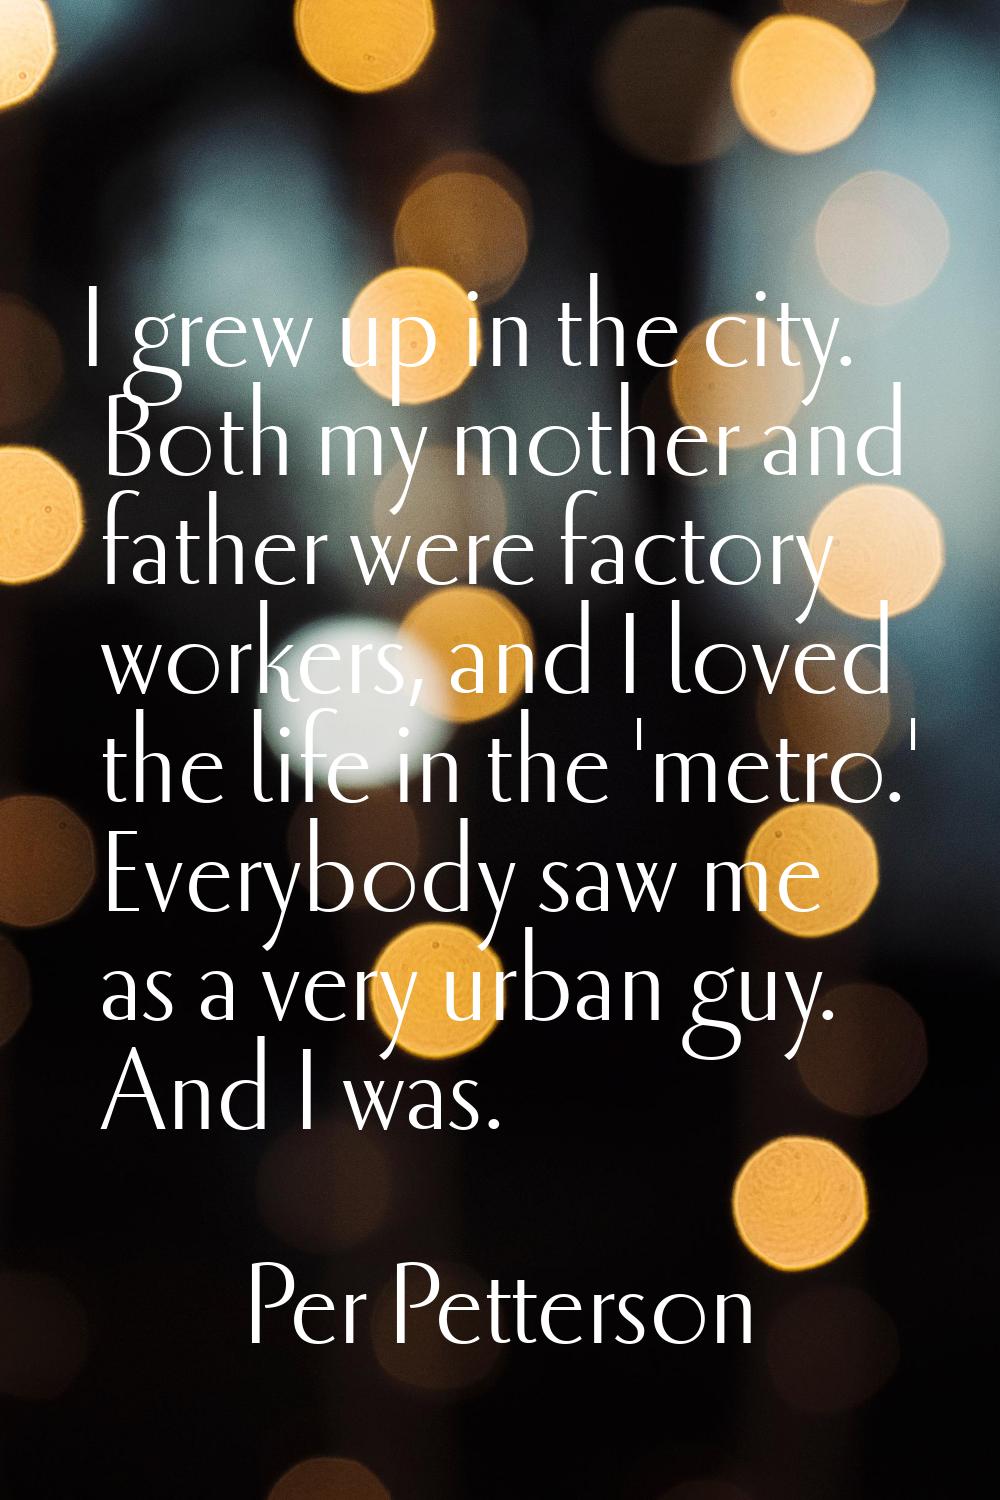 I grew up in the city. Both my mother and father were factory workers, and I loved the life in the 